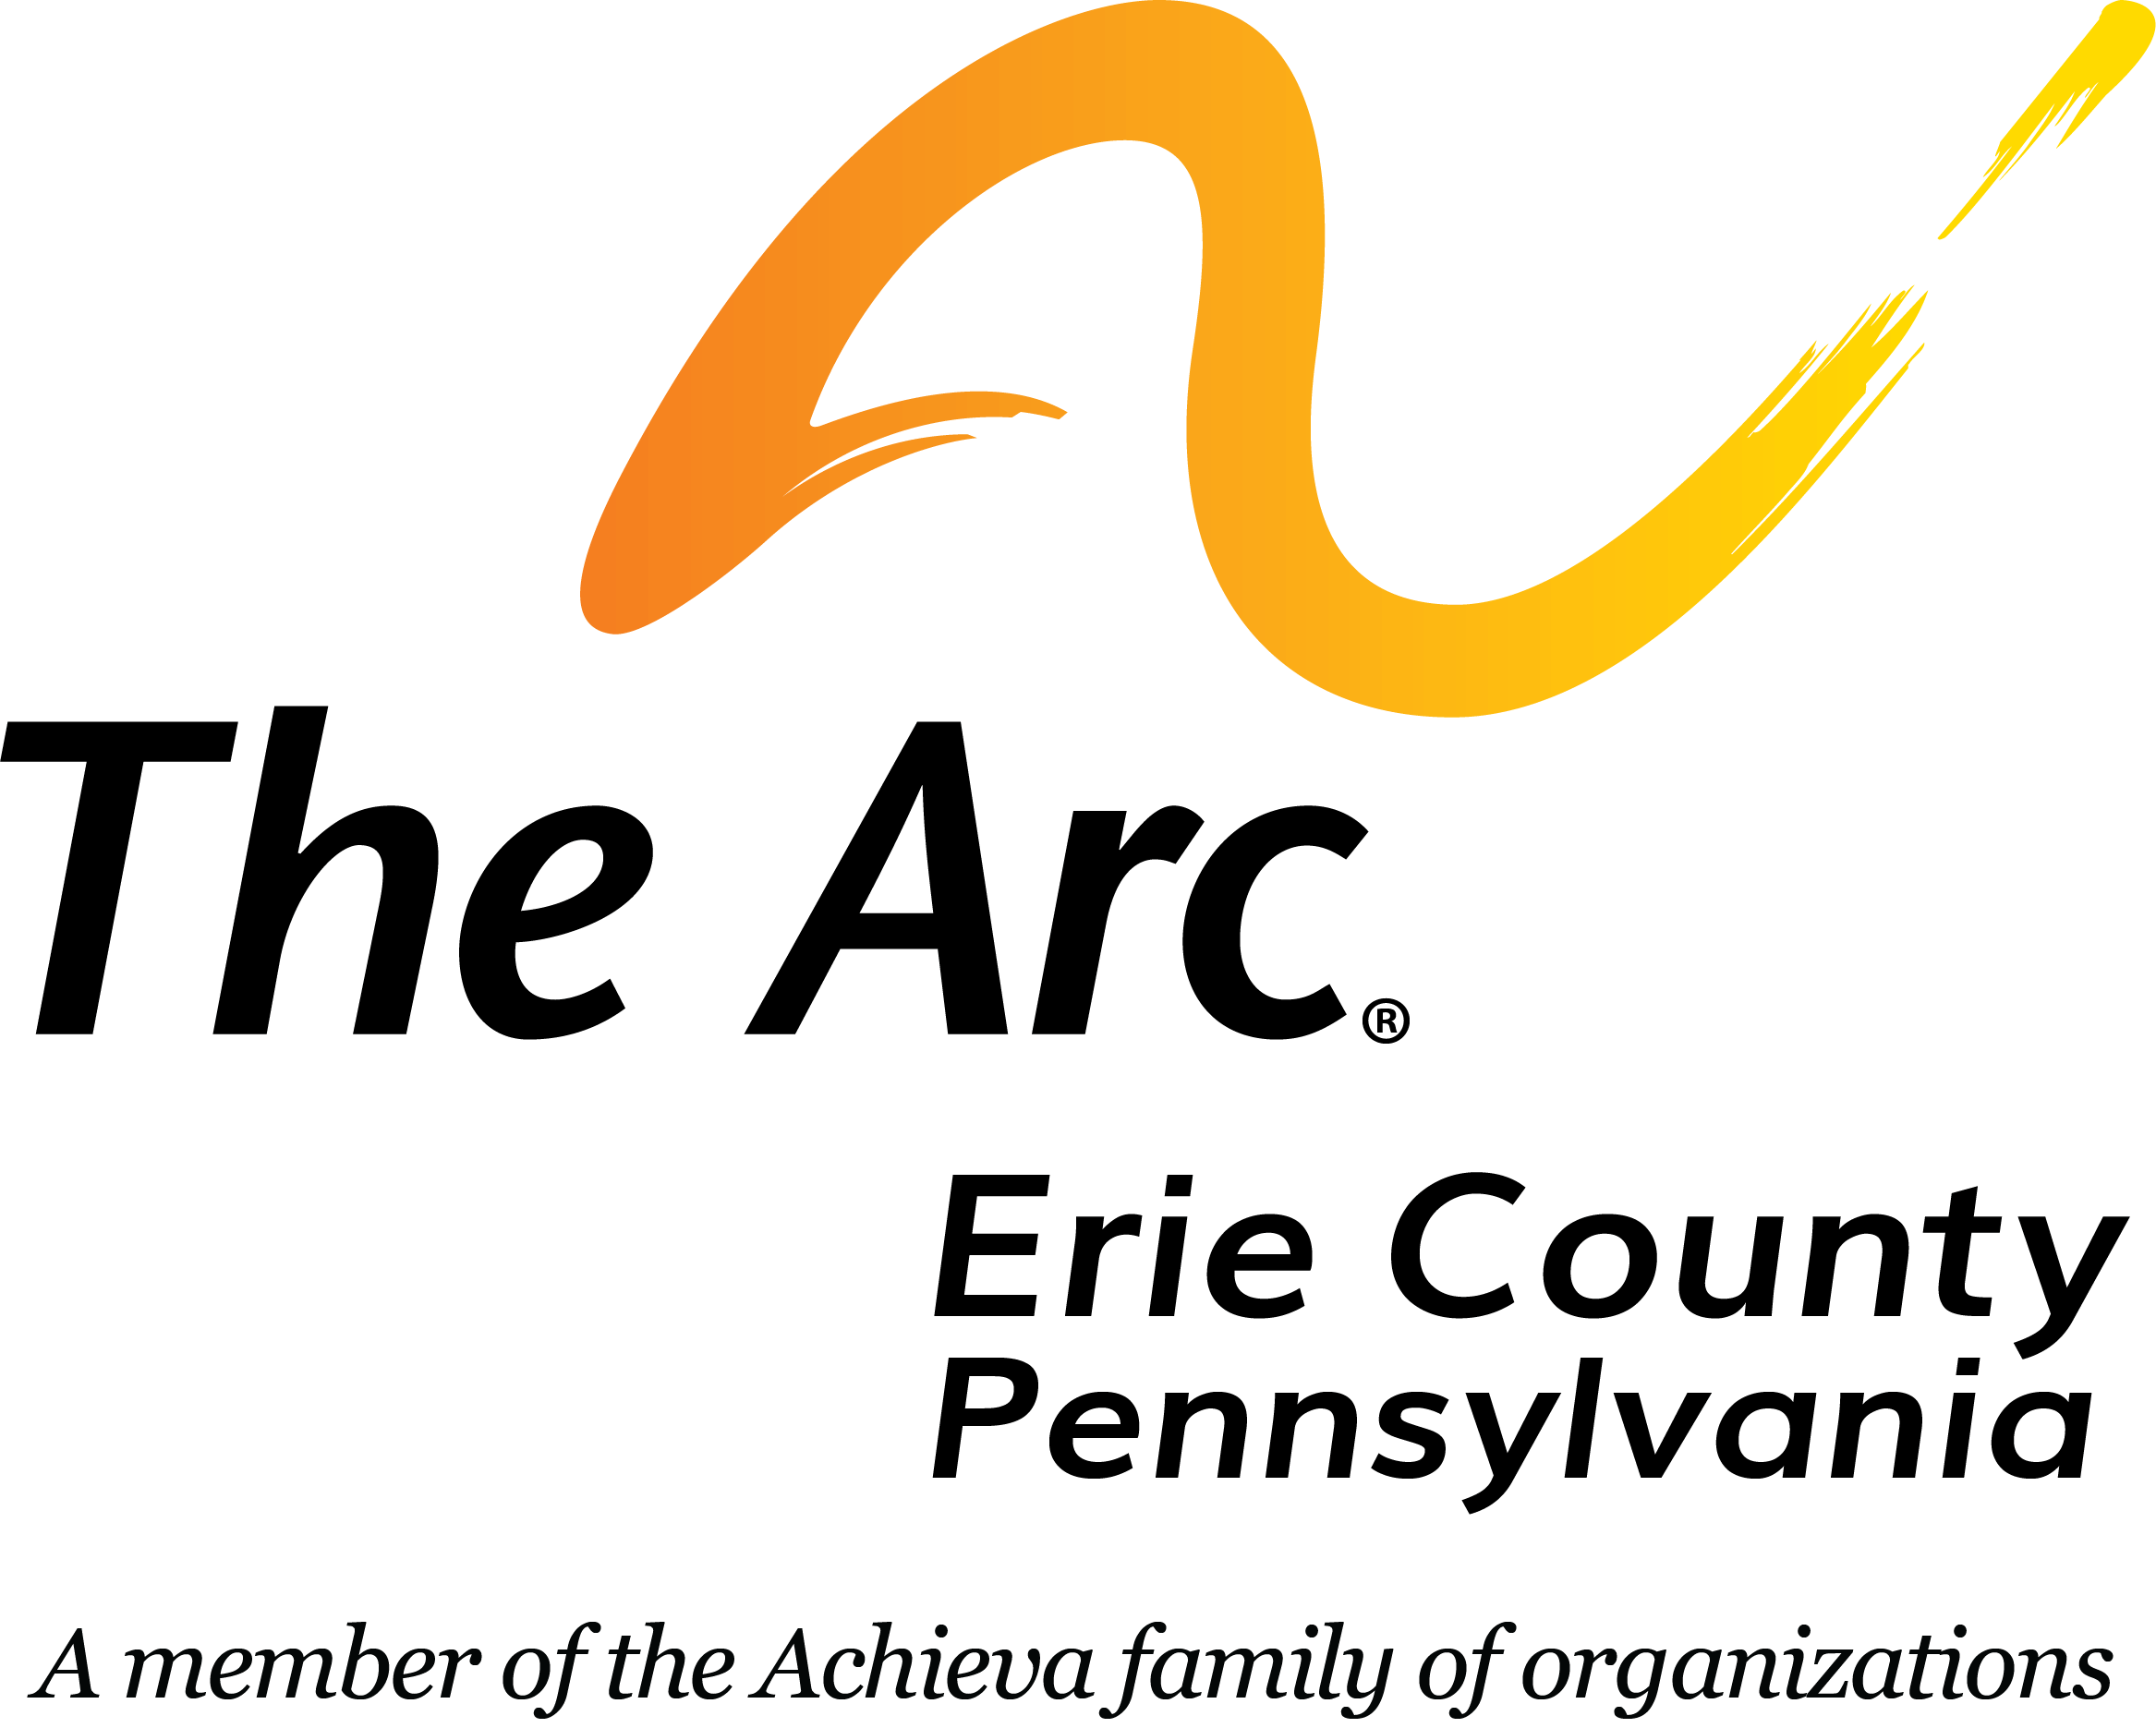 The Arc Erie County Pennsylvania Logo features a splash of color ranging from orange to gold above the organization name,